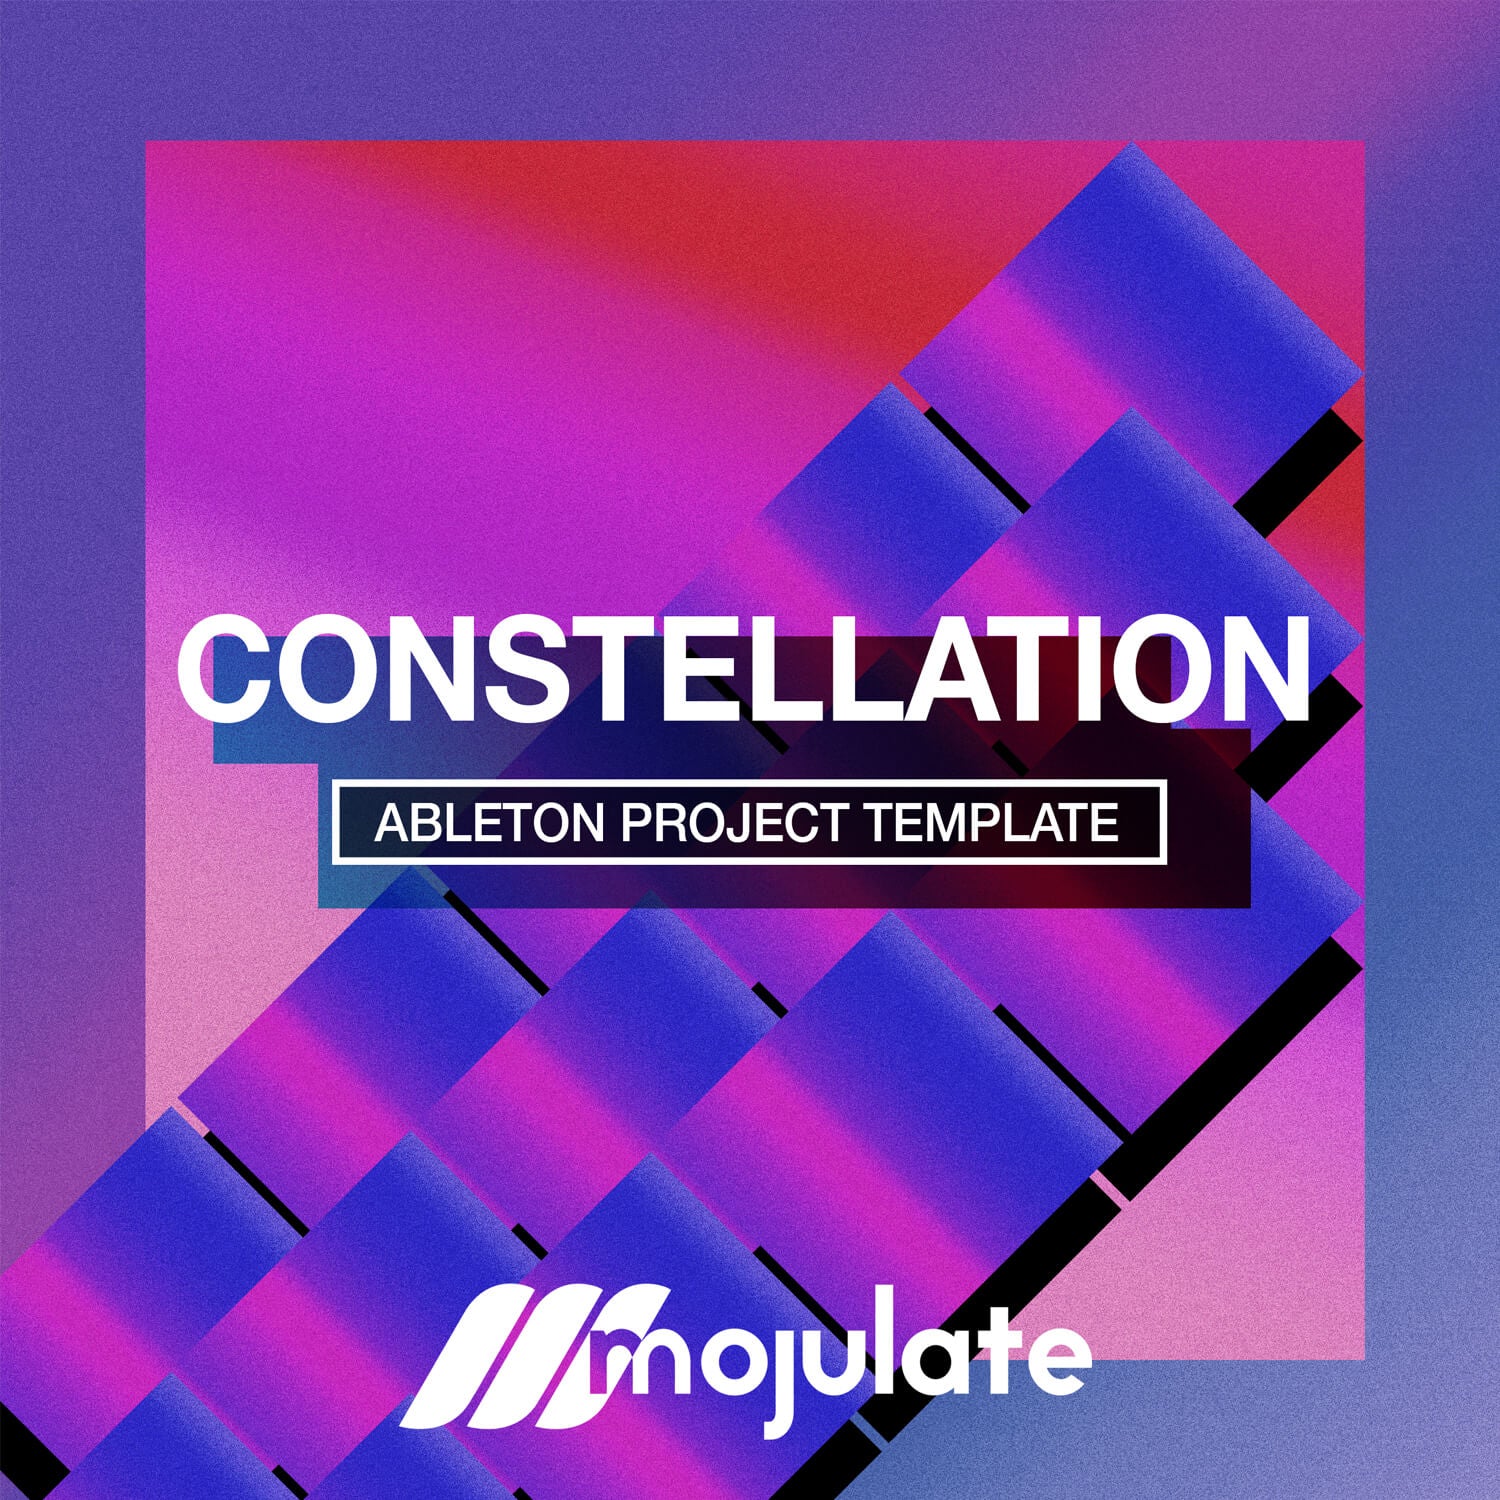 Constellation | Ableton Project Template